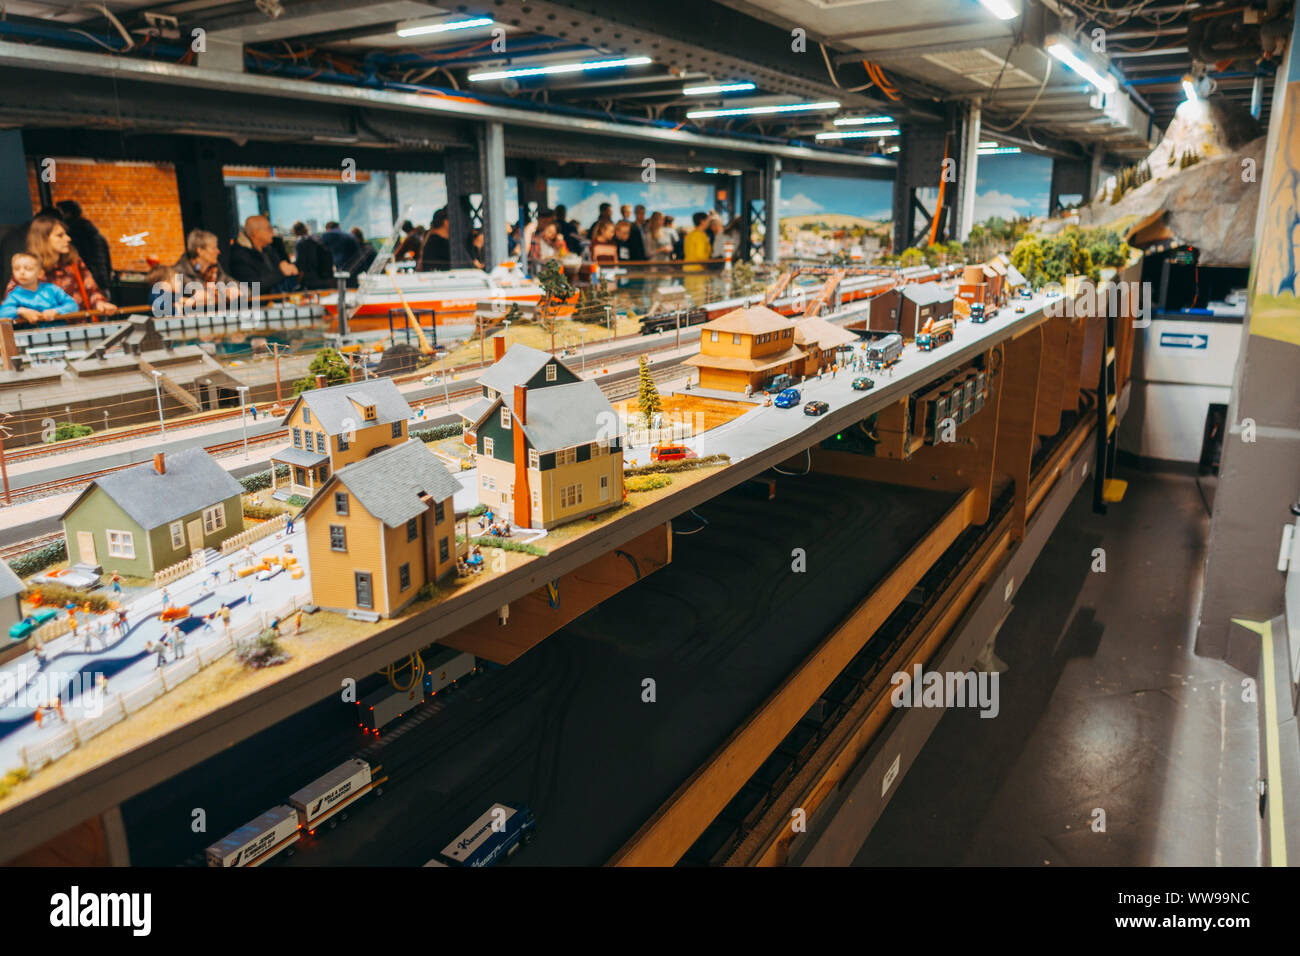 Behind the scenes at Miniatur Wunderland, an enormous display of miniature scenes complete with tiny electric vehicles, model train sets, and scenery Stock Photo